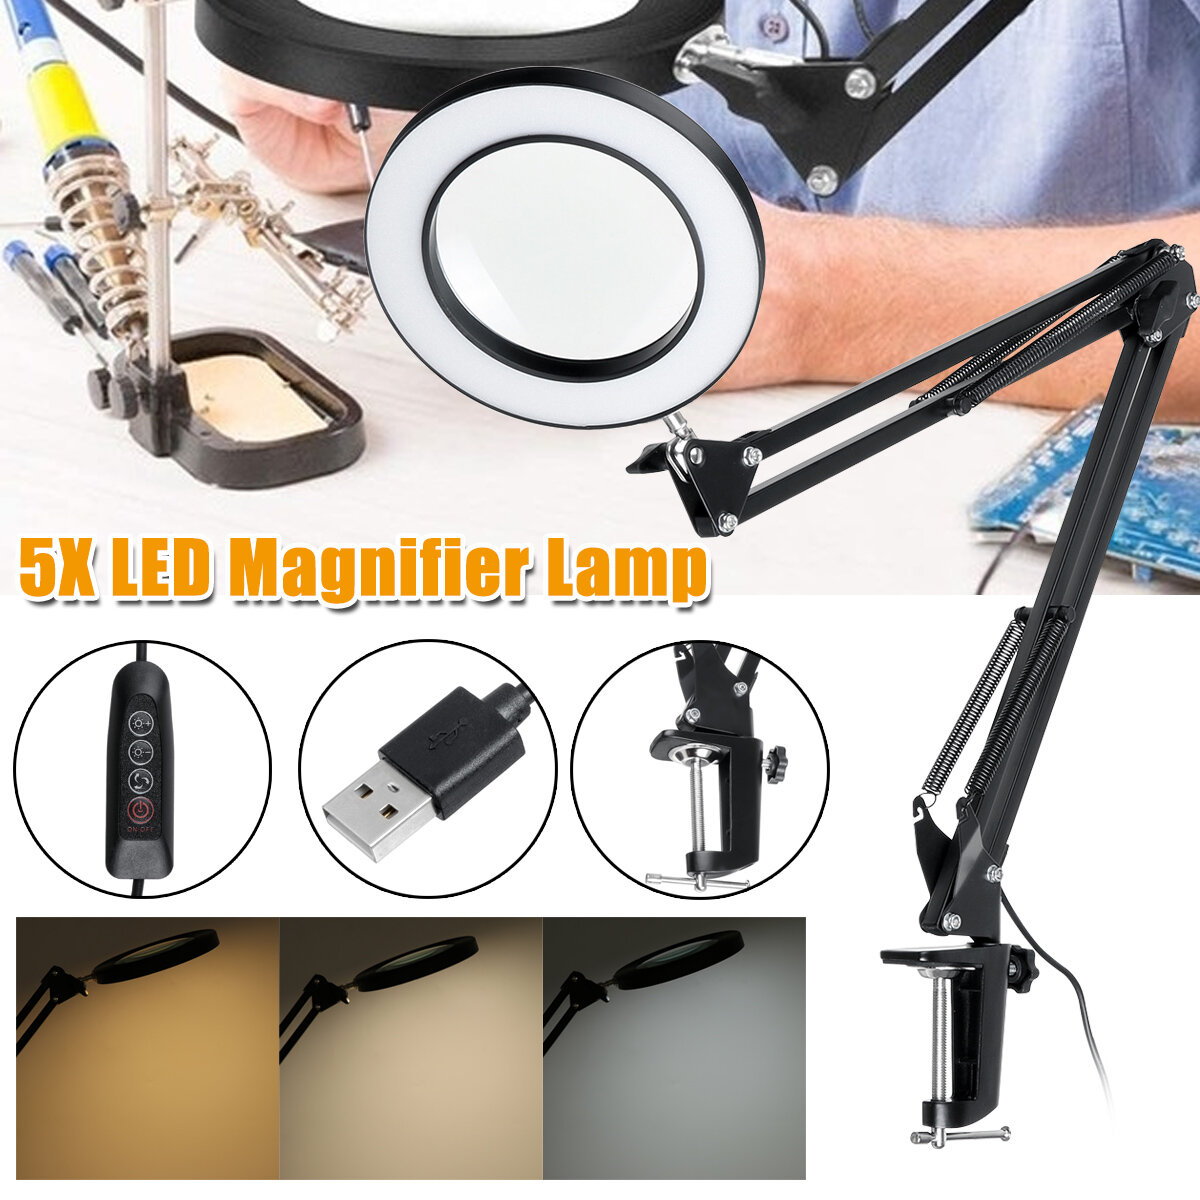 5x magnifying lamp clamp mount led magnifier lamp manicure tattoo beauty light